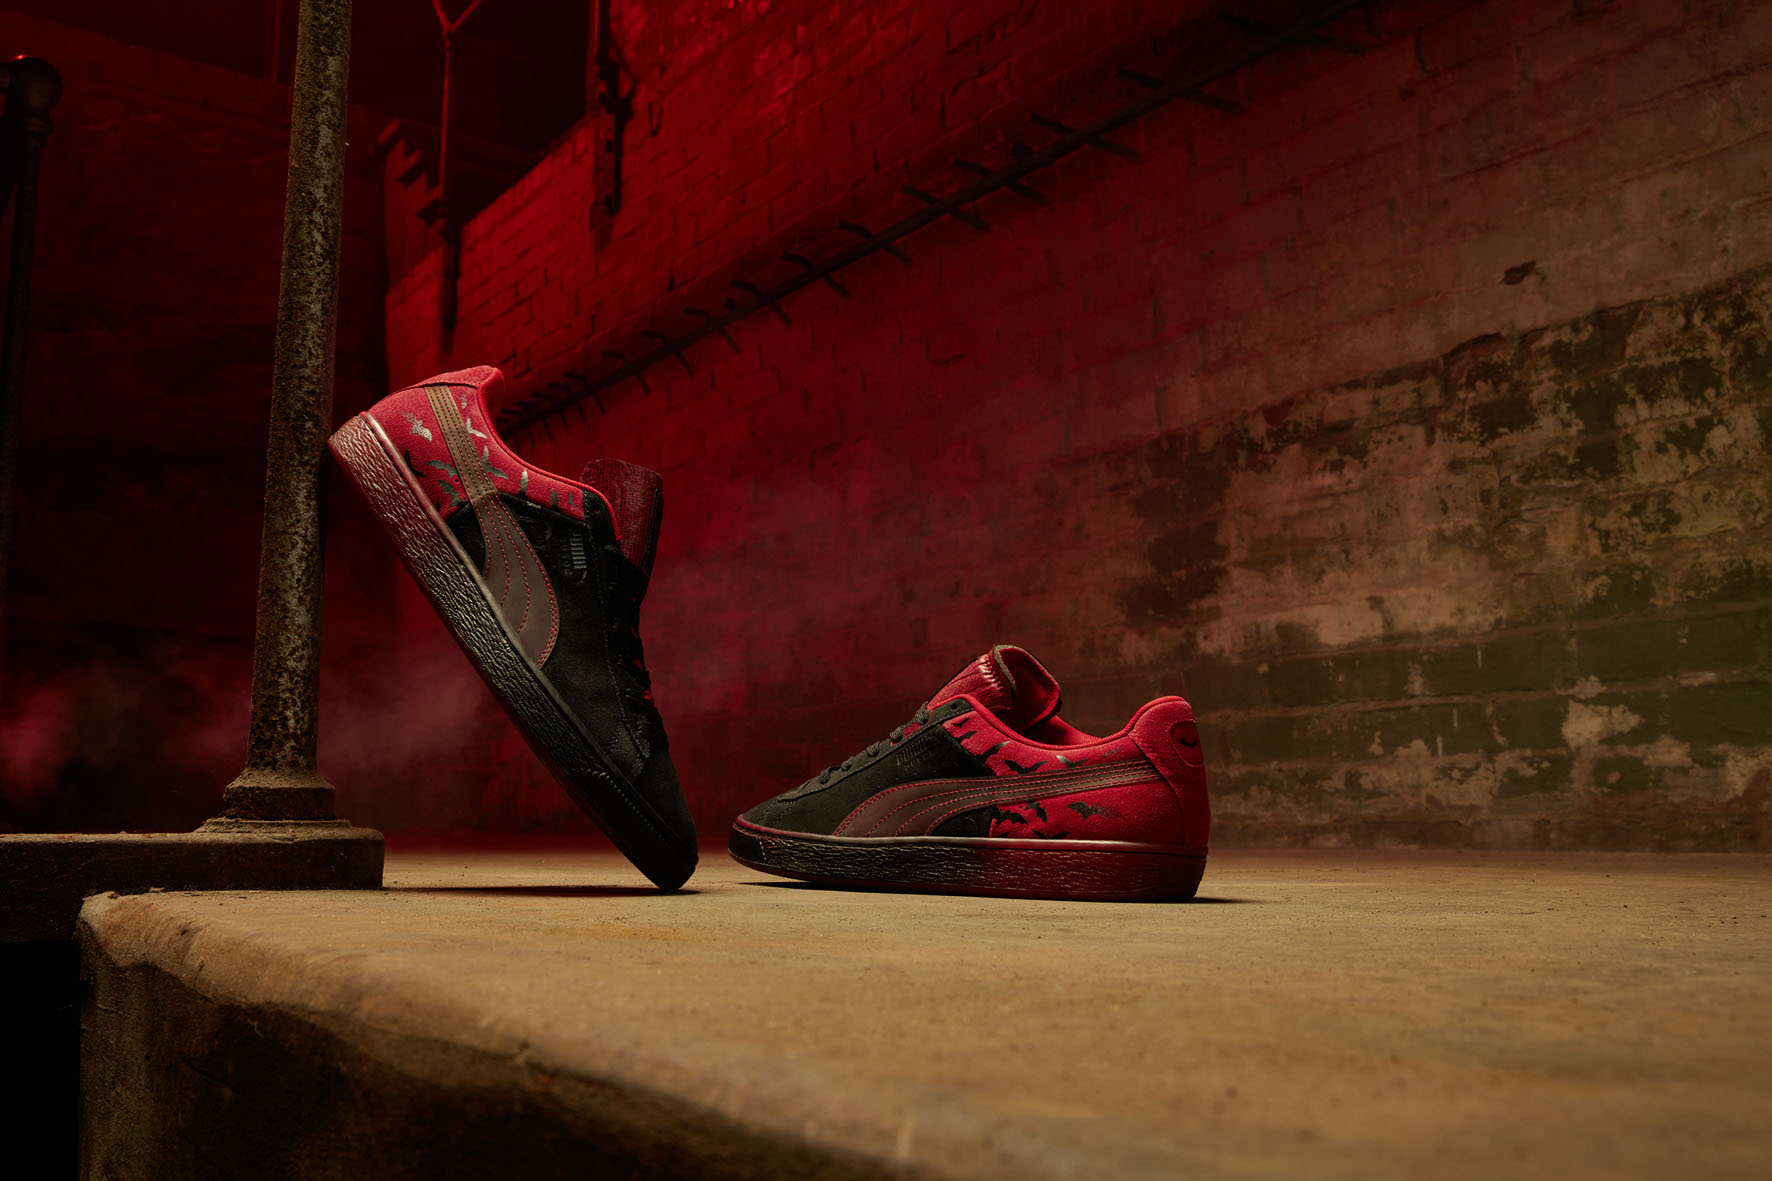 Swag Craze: First Look: The PUMA x Batman Limited-edition Collection